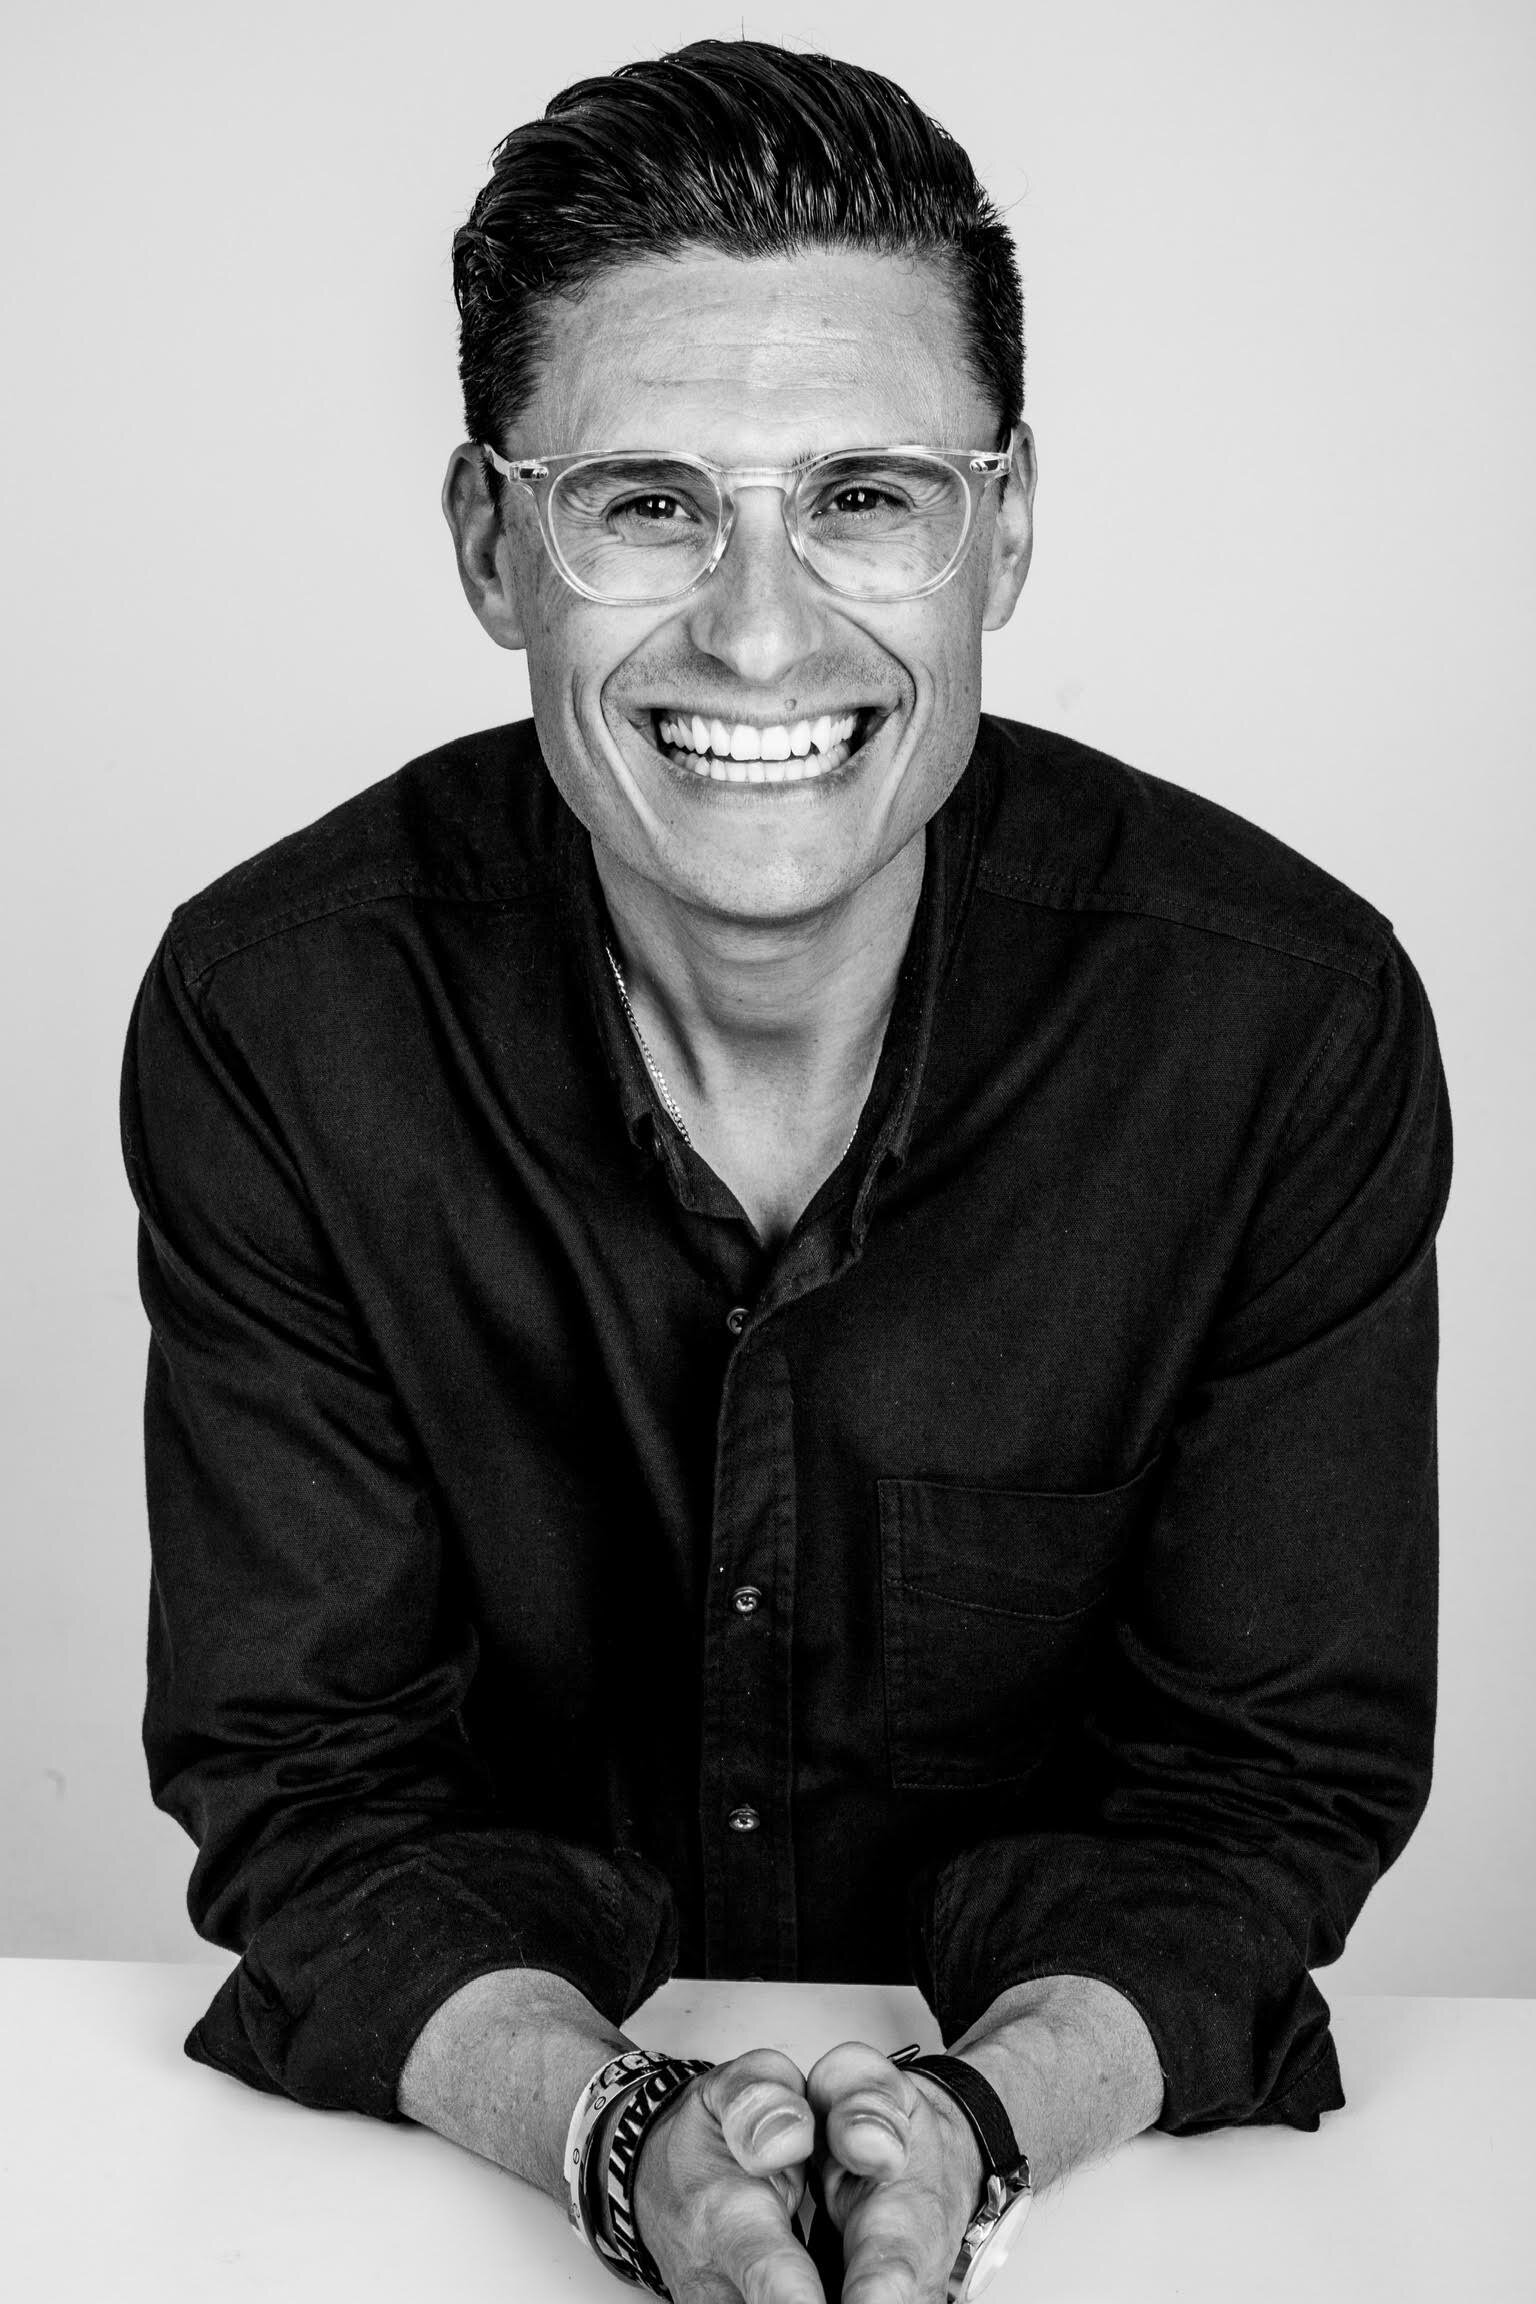 Developing An Empathetic, Supportive Leadership Mentality with Chad Veach